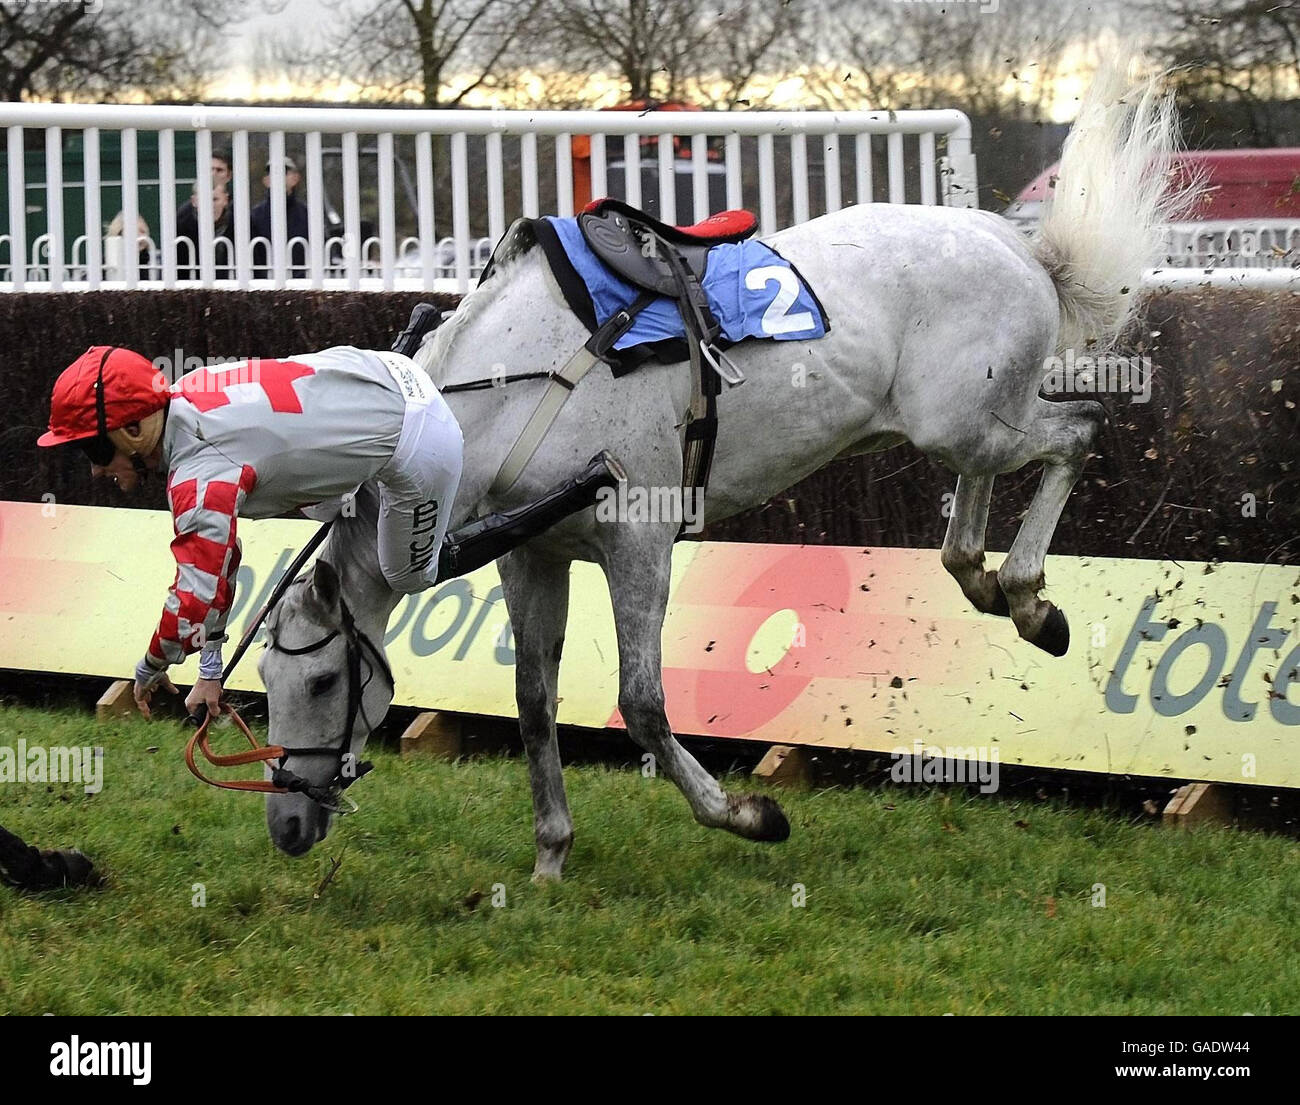 Horse Racing - Wetherby Racecourse. Sharkeys Dream and Keith Mercer fall in the Bramham Hall for Conferences and Banqueting Beginners Chase at Wetherby Racecourse. Stock Photo